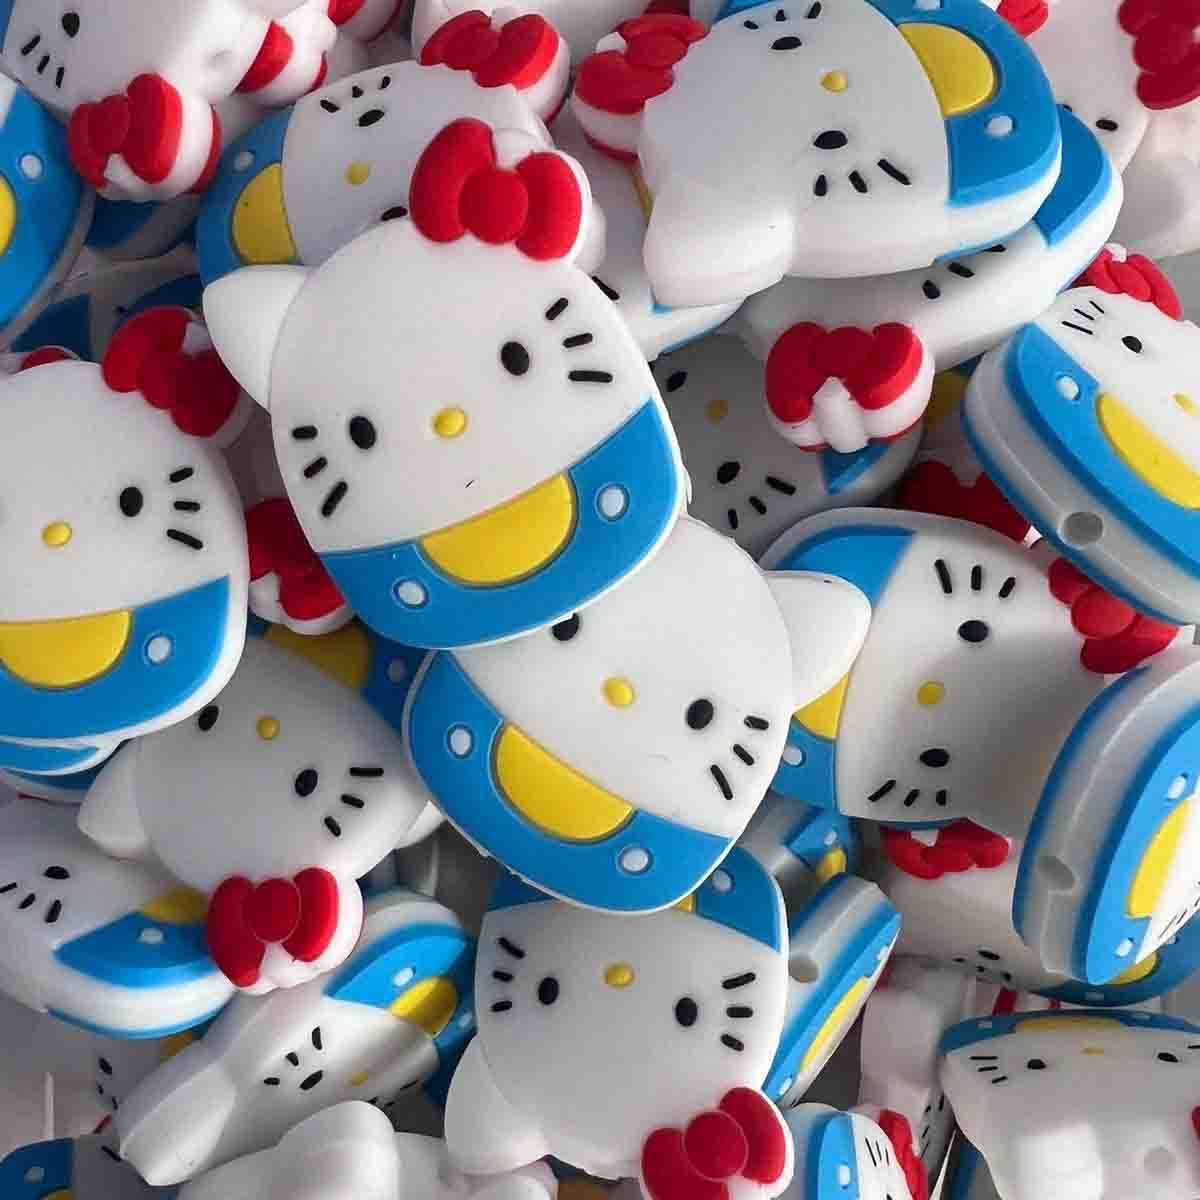 High-quality Silicone Hello Kitty Beads Set of 5